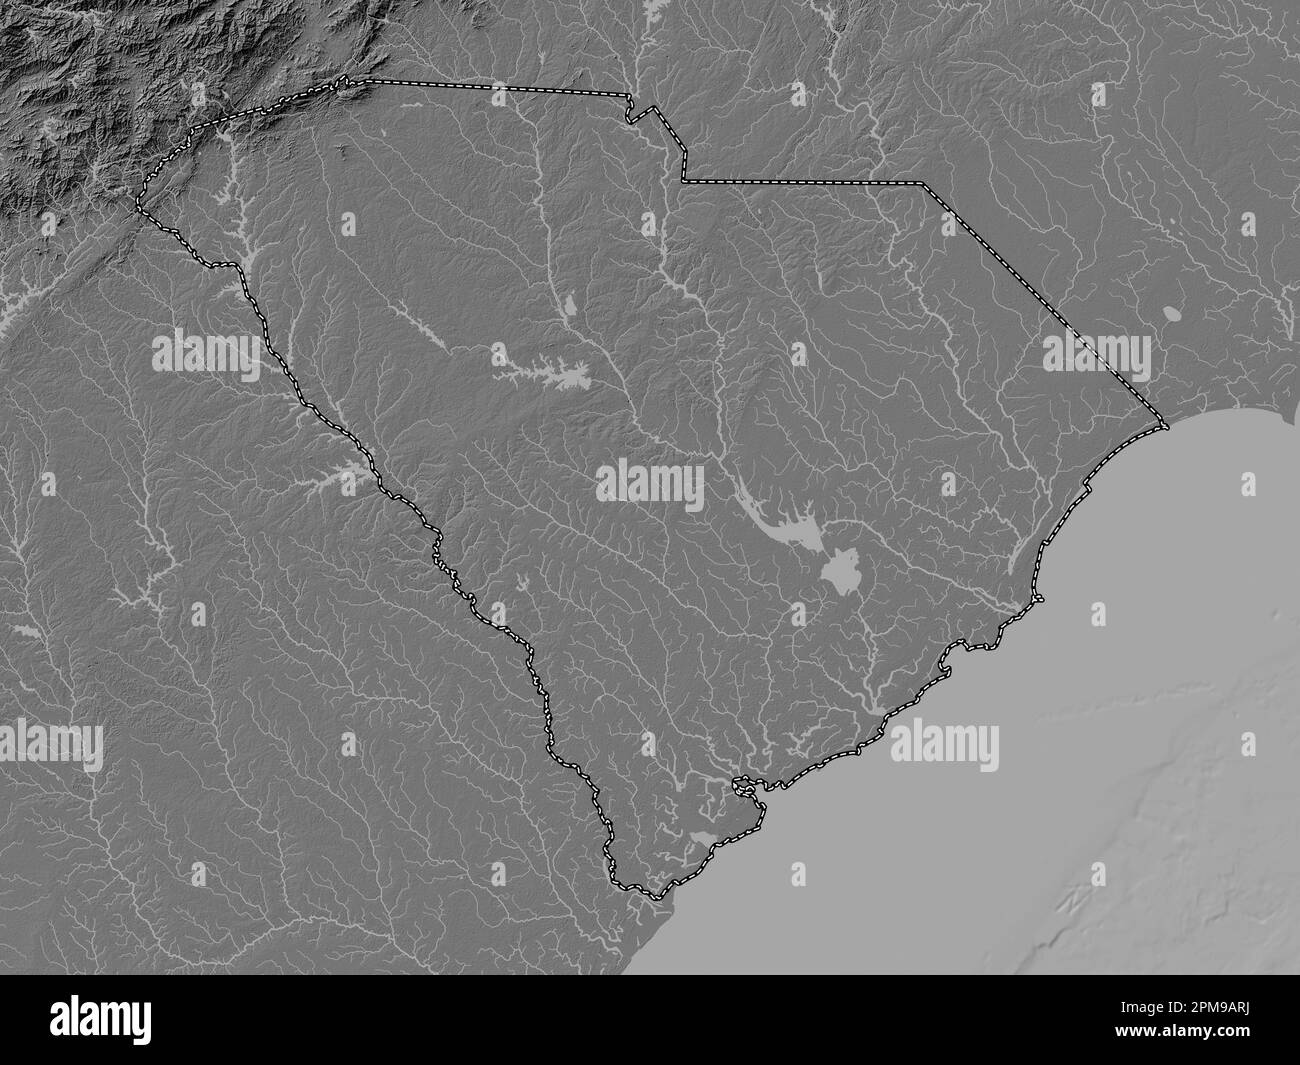 South Carolina, state of United States of America. Bilevel elevation map with lakes and rivers Stock Photo